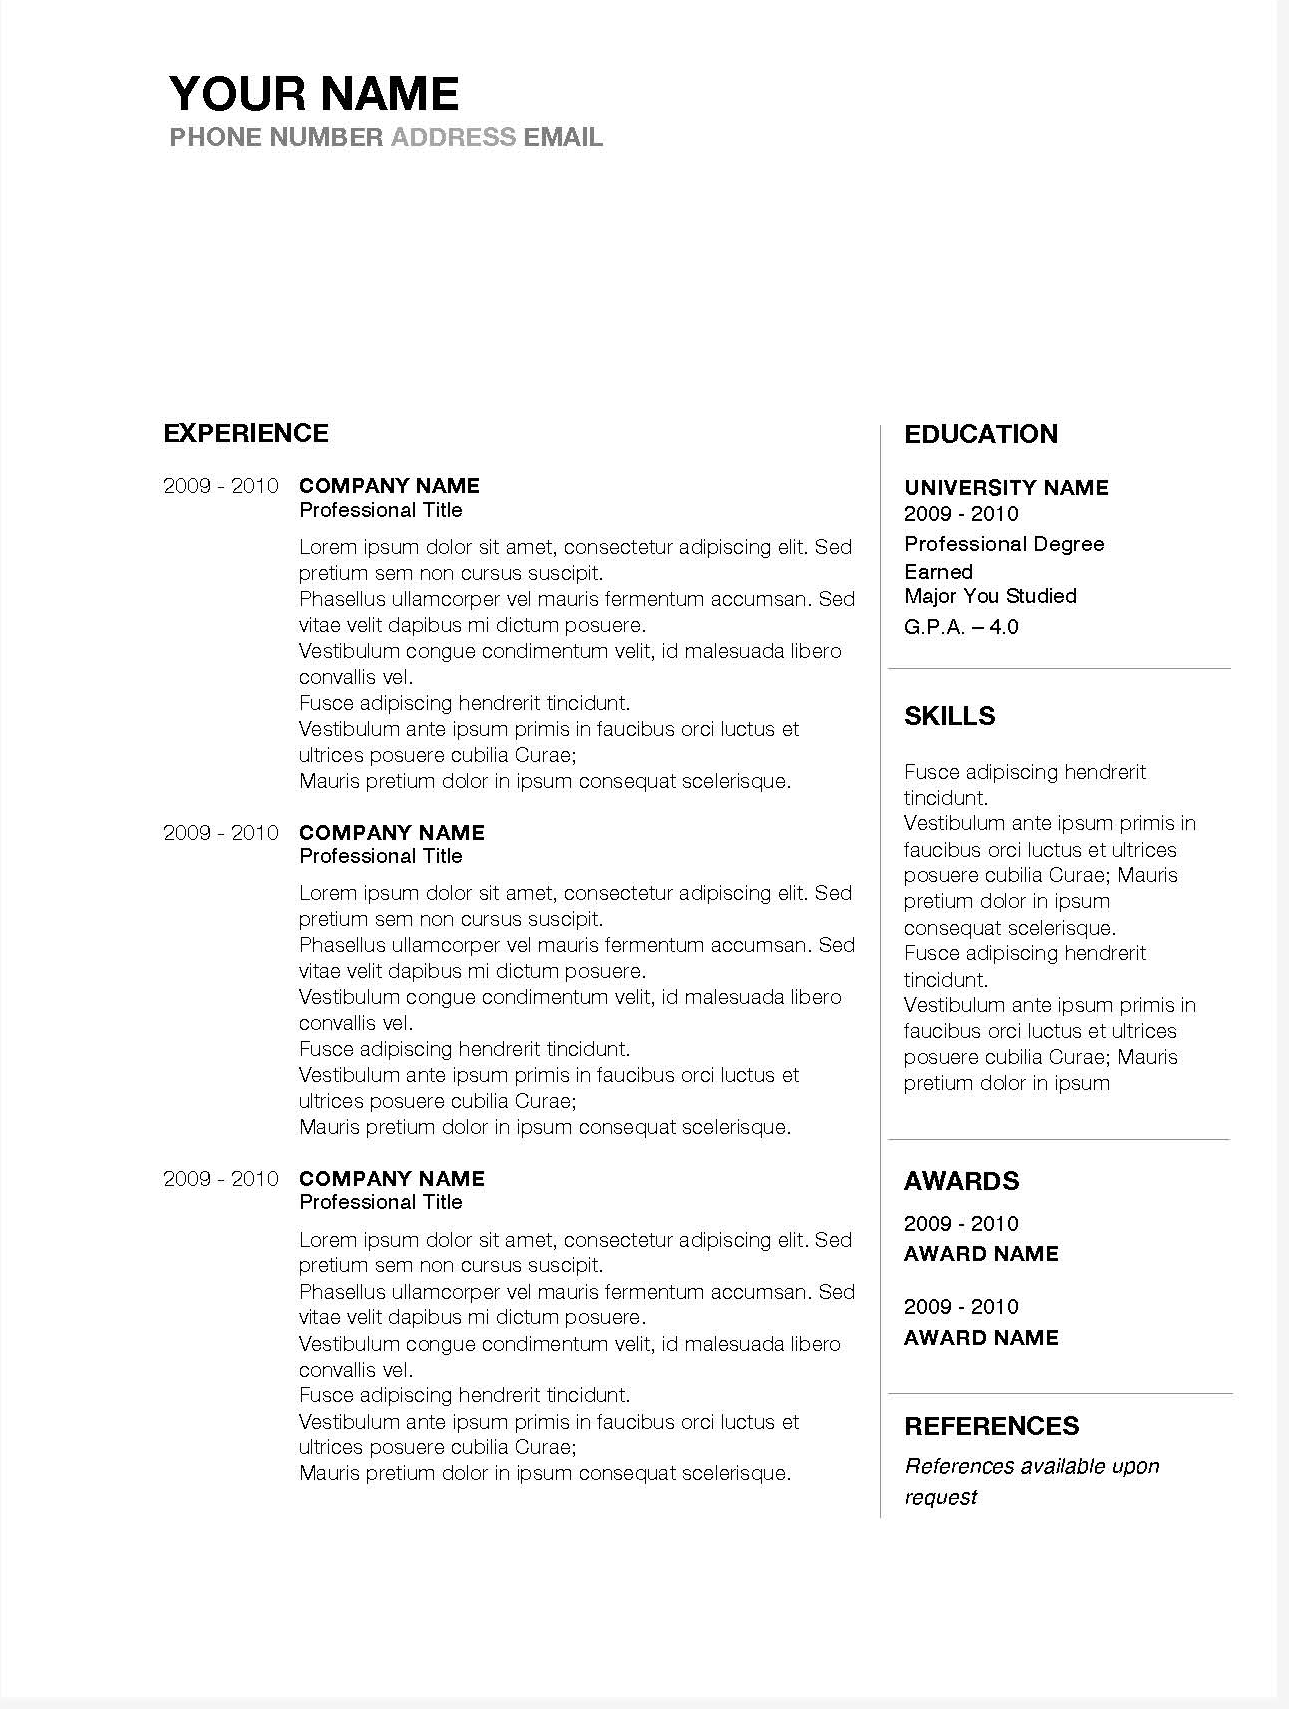 5 best free resume templates of 2019